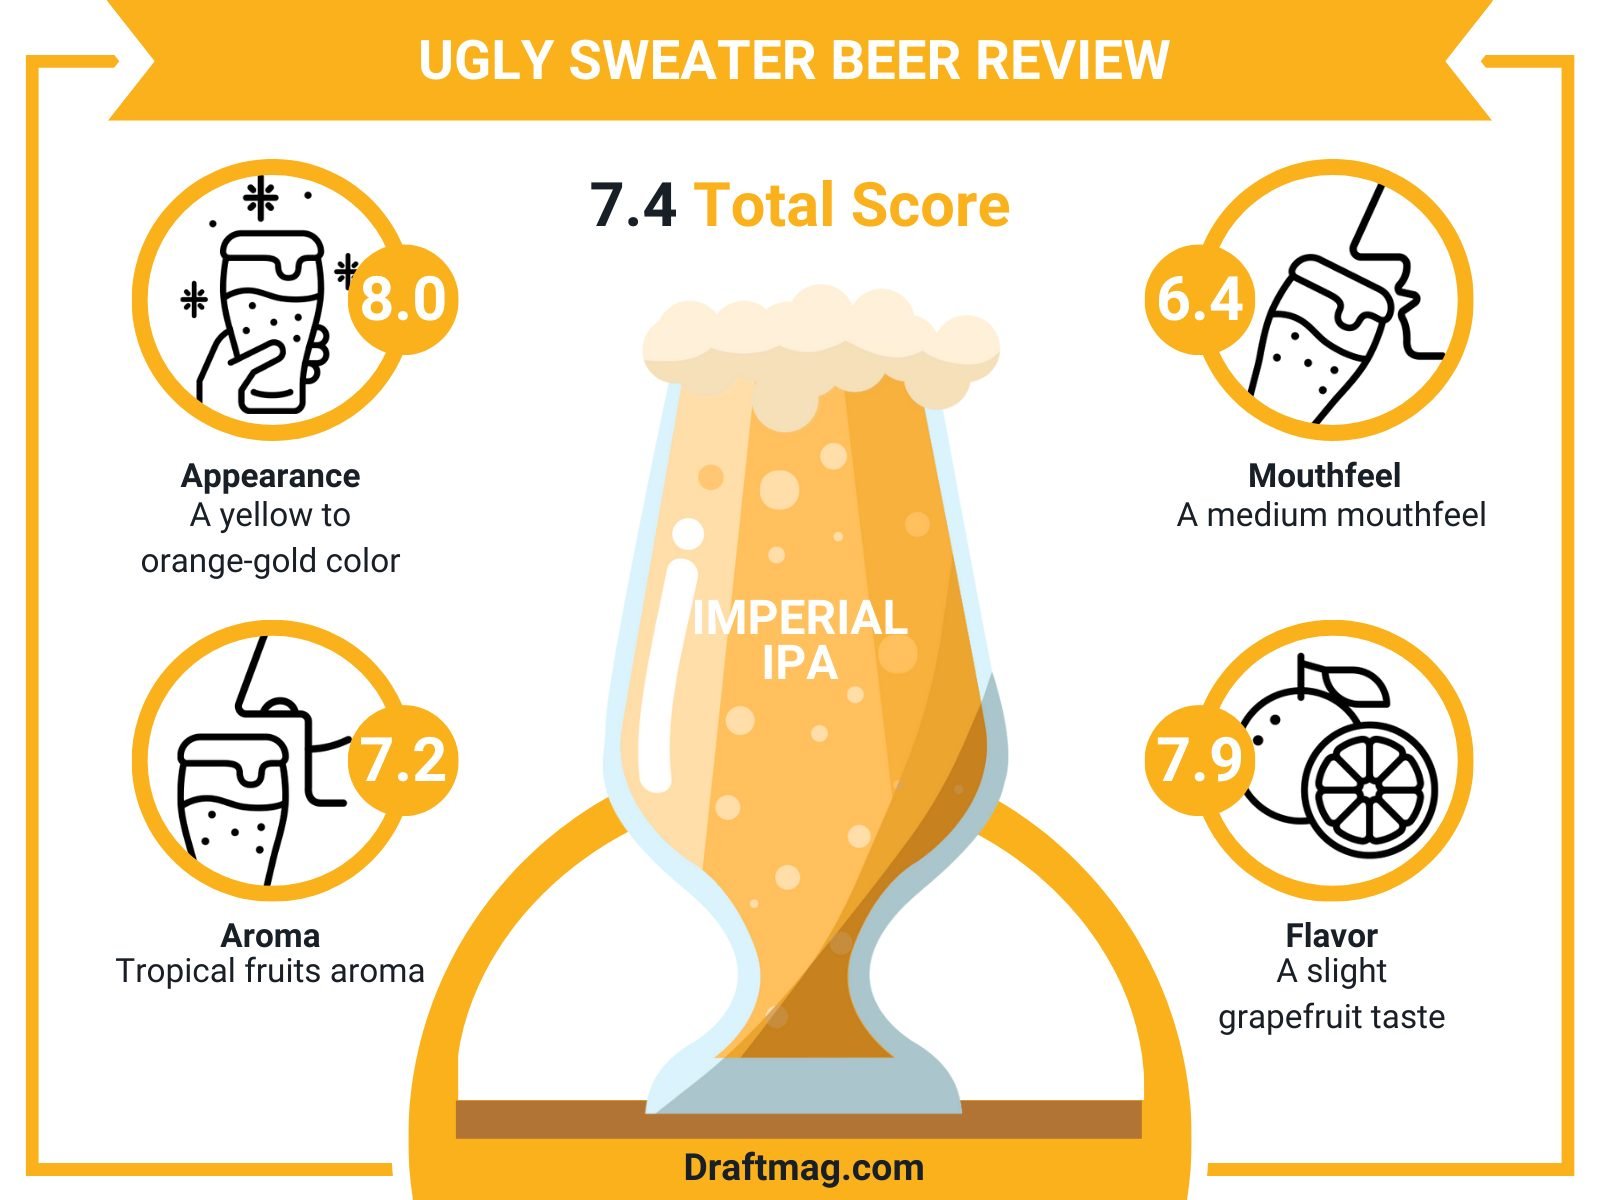 Ugly Sweater Beer Review Infographic